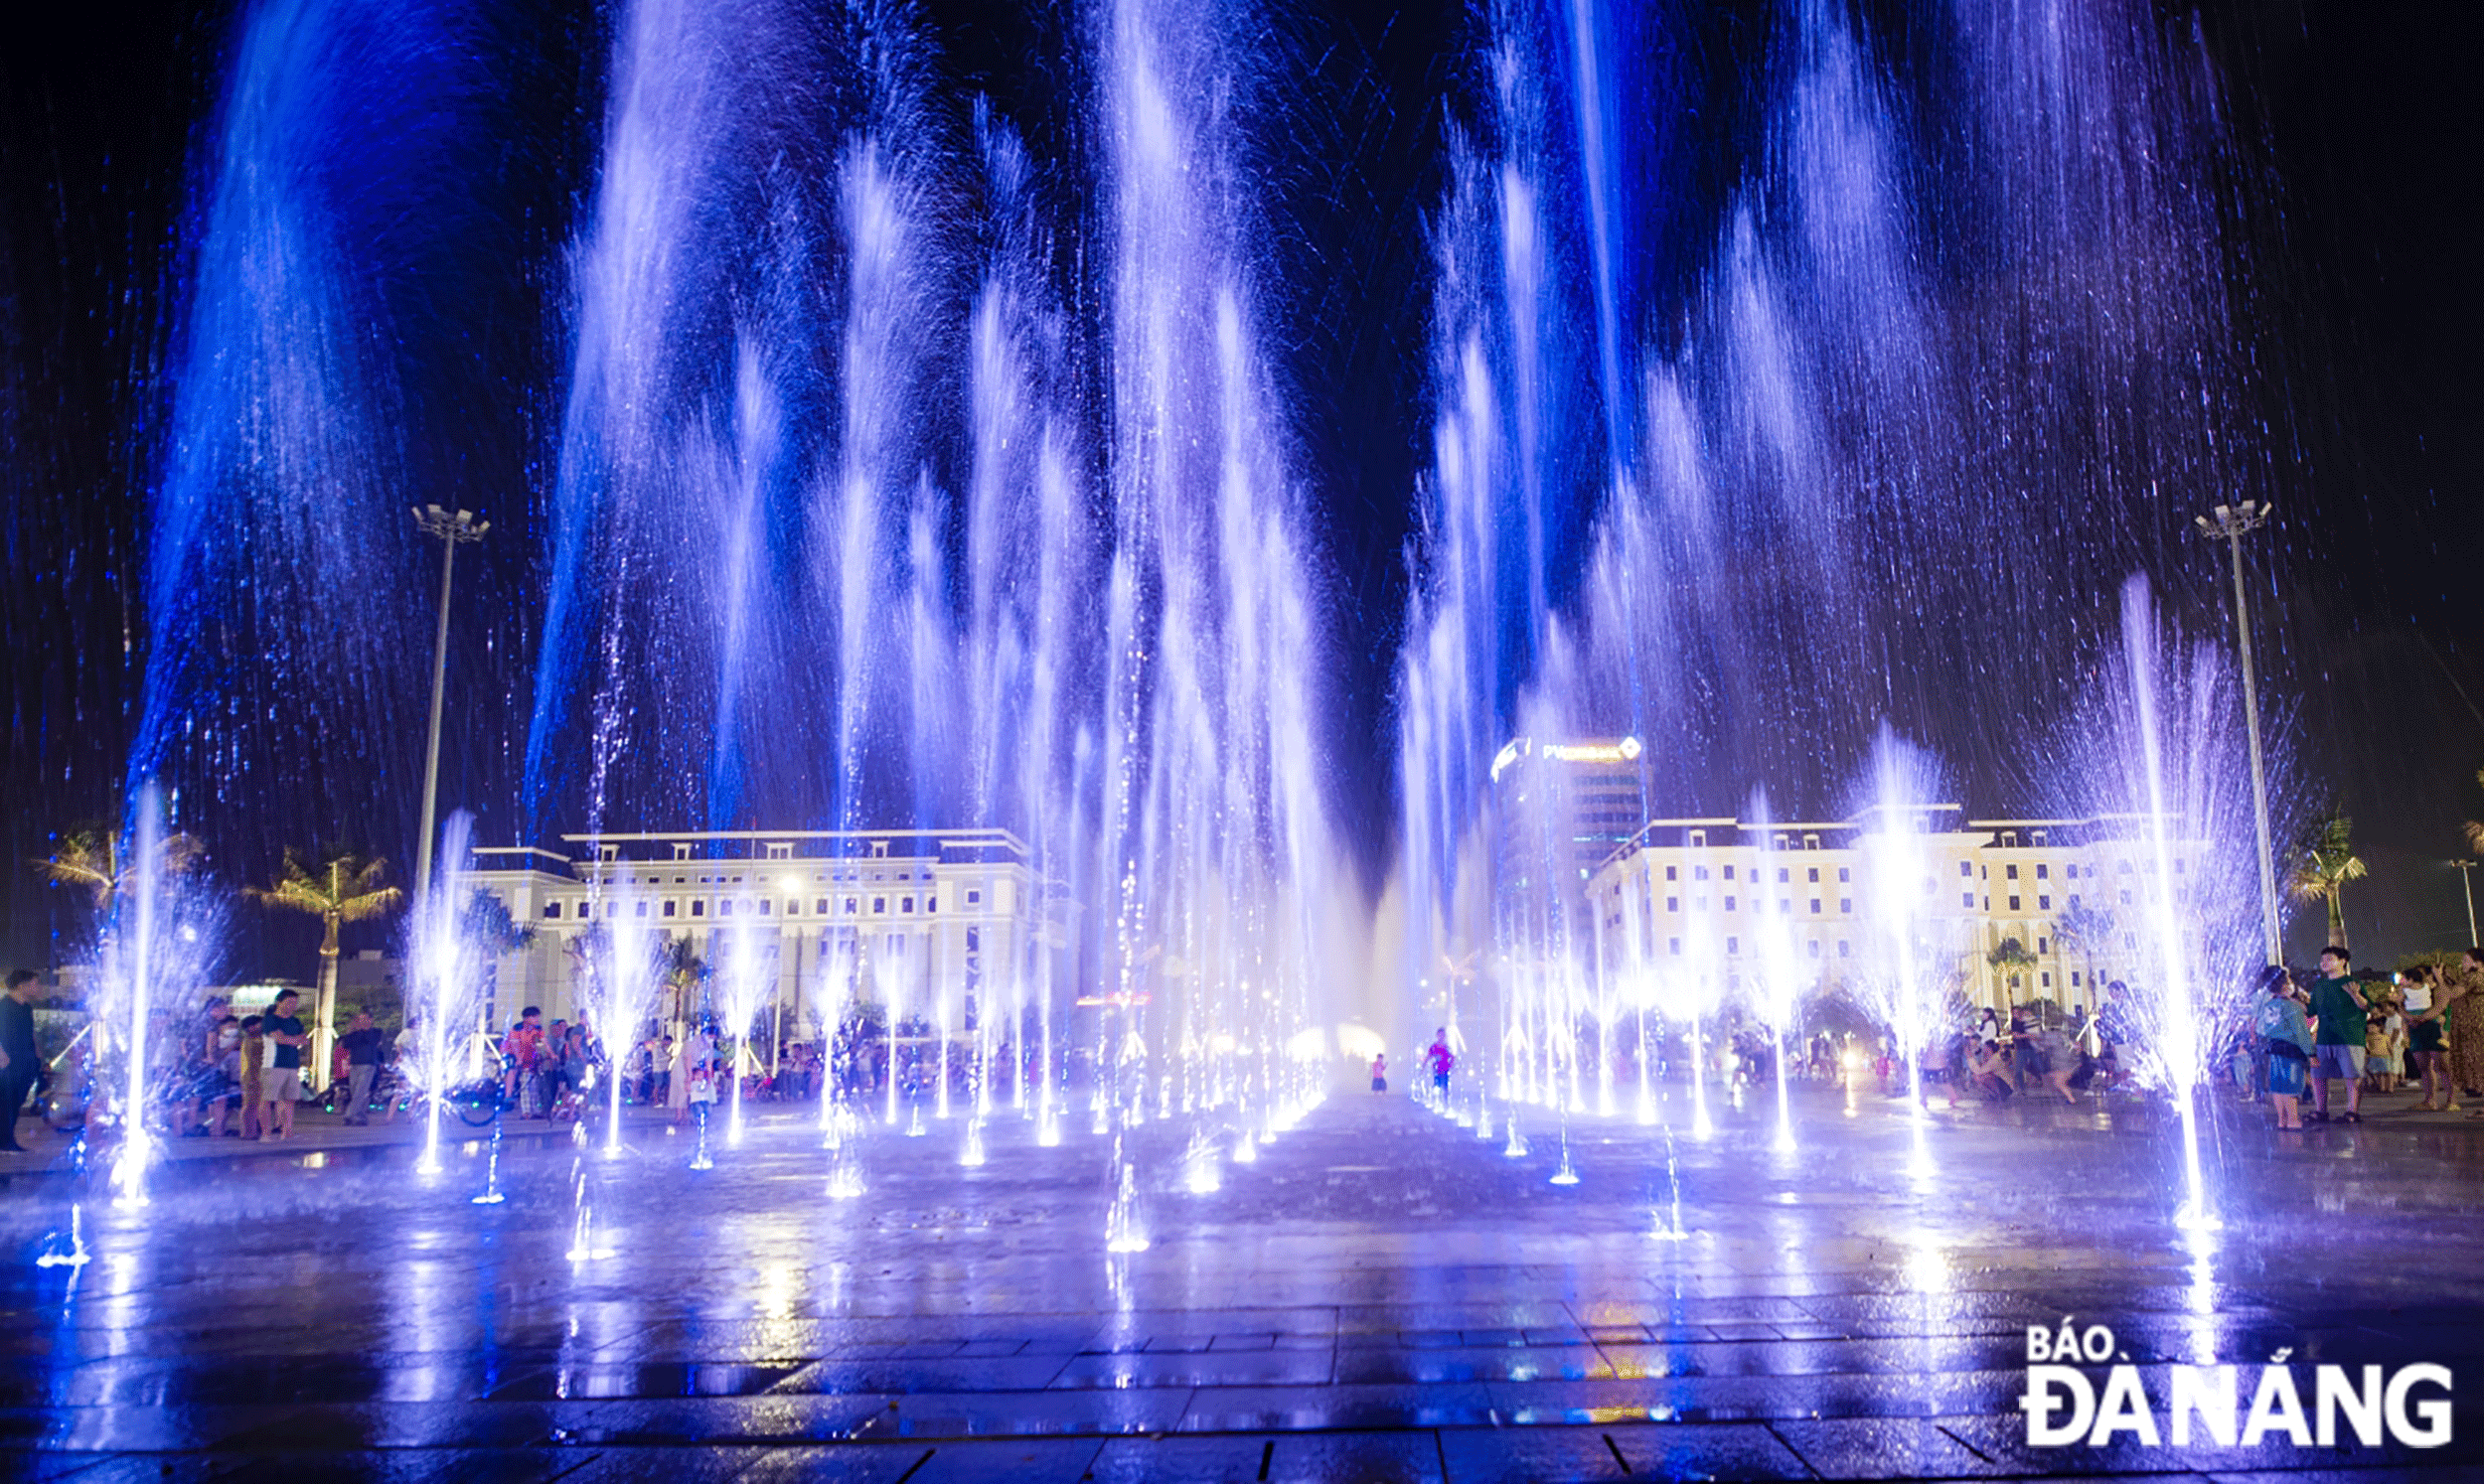 Many people are excited to watch the musical water fountain show. Photo: Mai Quang Hien